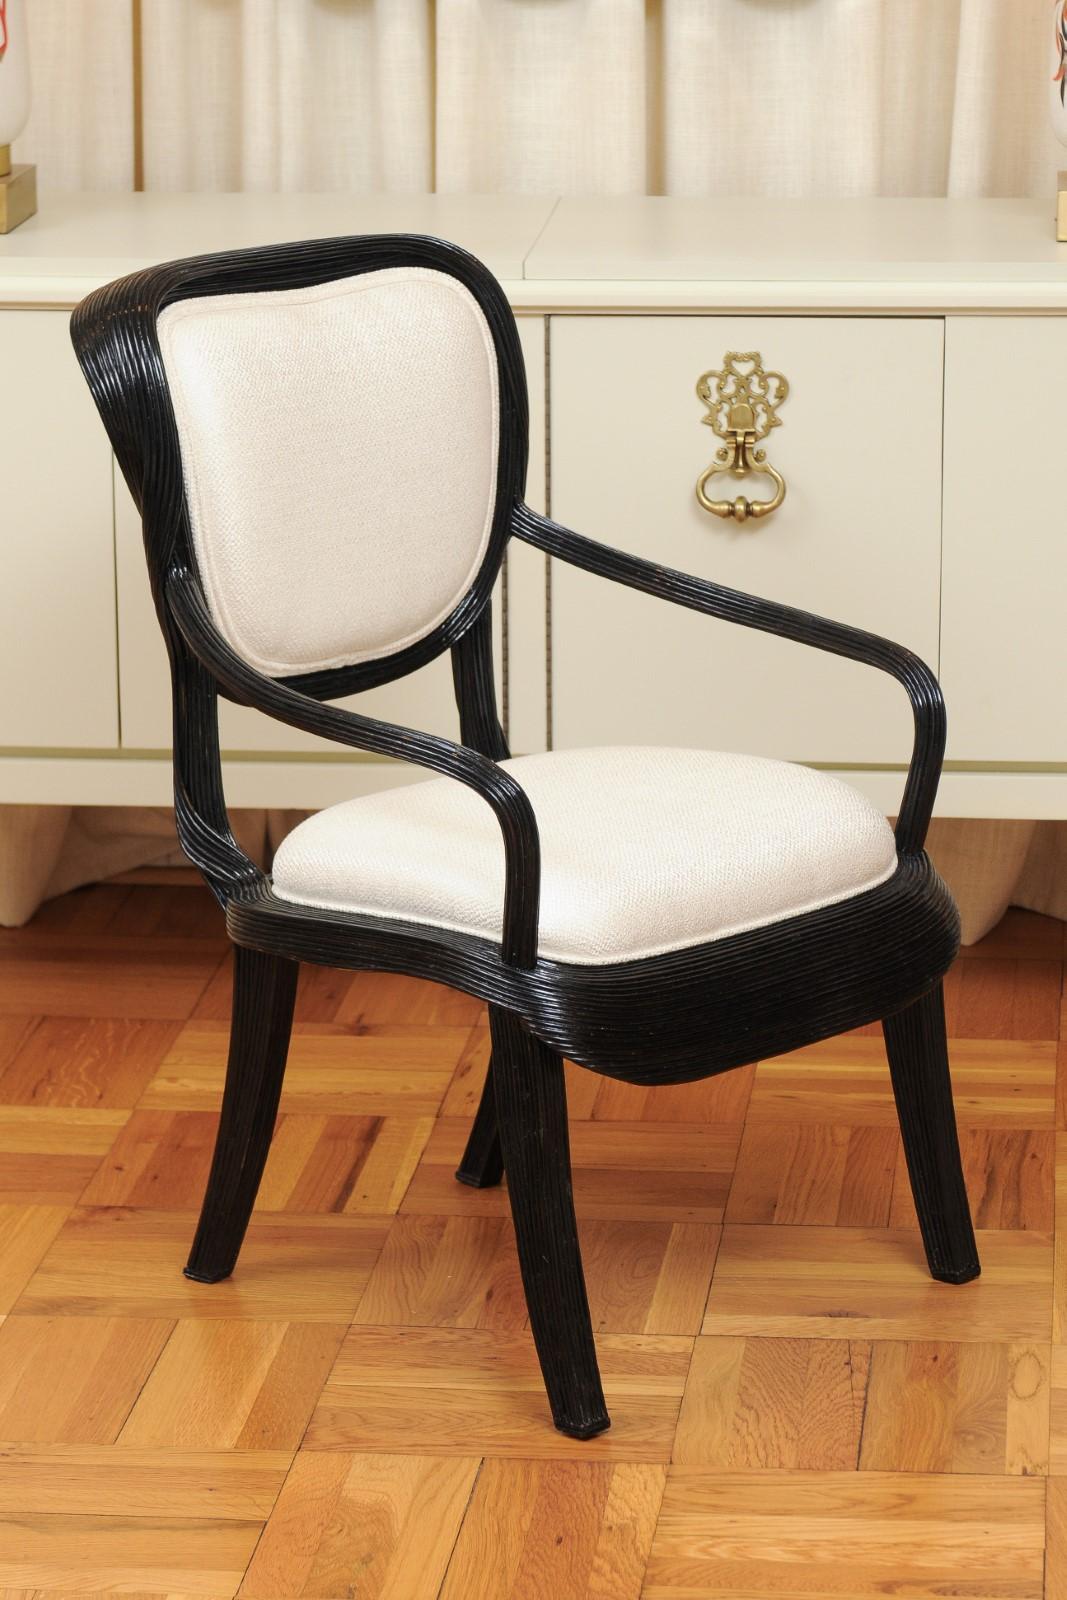 These magnificent dining chairs are shipped as professionally photographed and described in the listing narrative: Meticulously professionally restored and installation ready. Expert custom upholstery service is available.

A majestic set of twelve